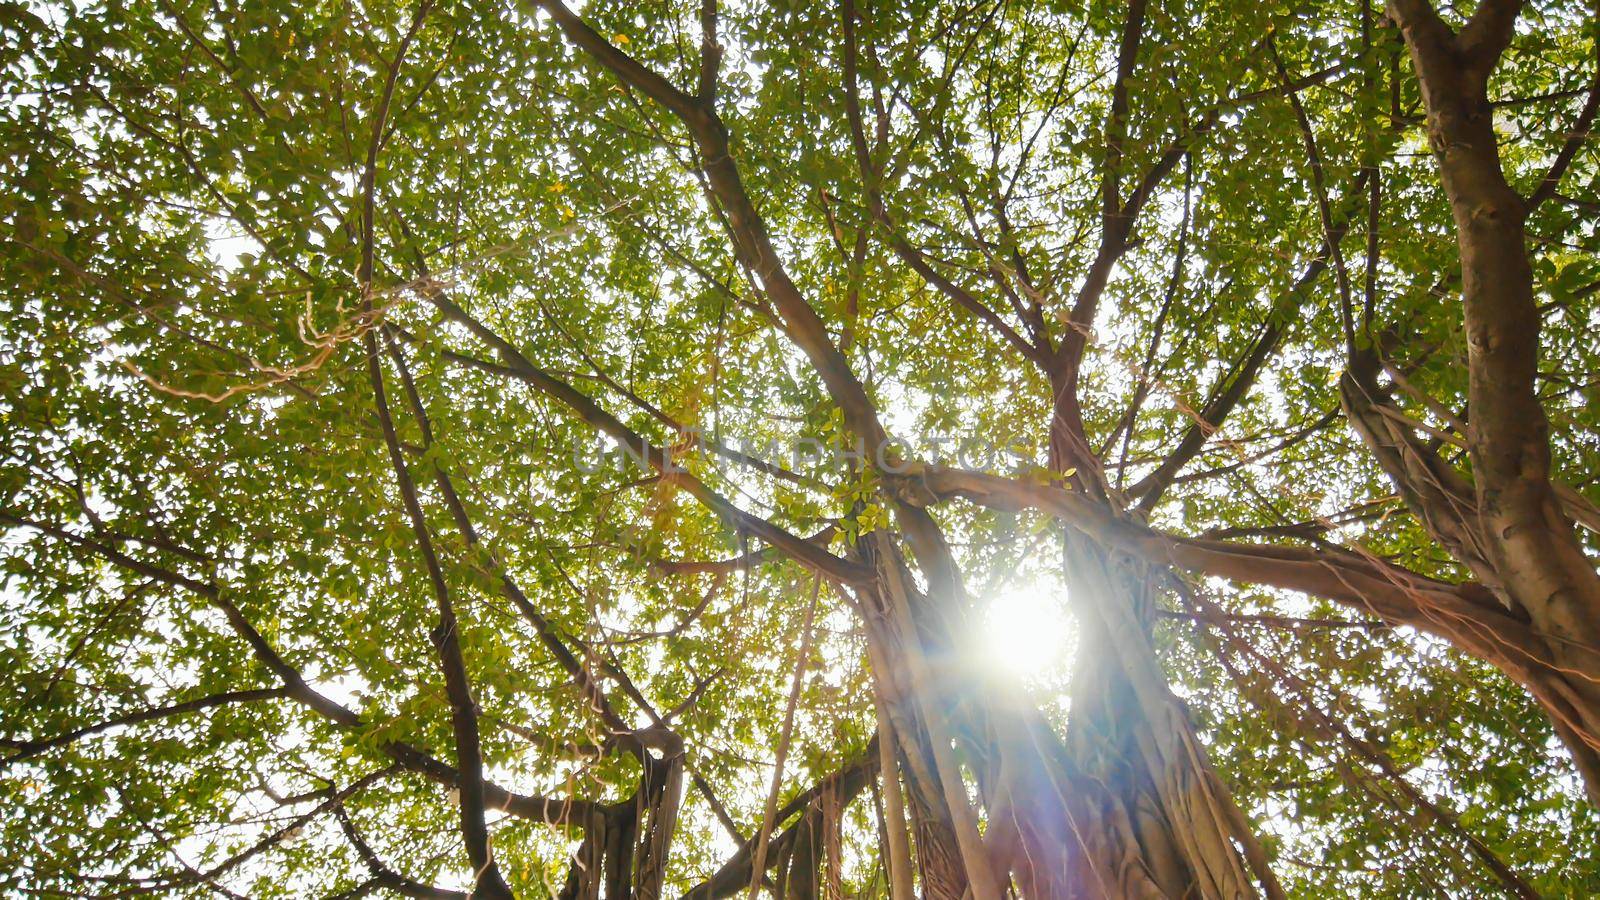 Rays of light shine through the Banyan tree in the jungles. Ayala Triangle Park in Manila. Video shooting in a circular motion. Electronic stabilization